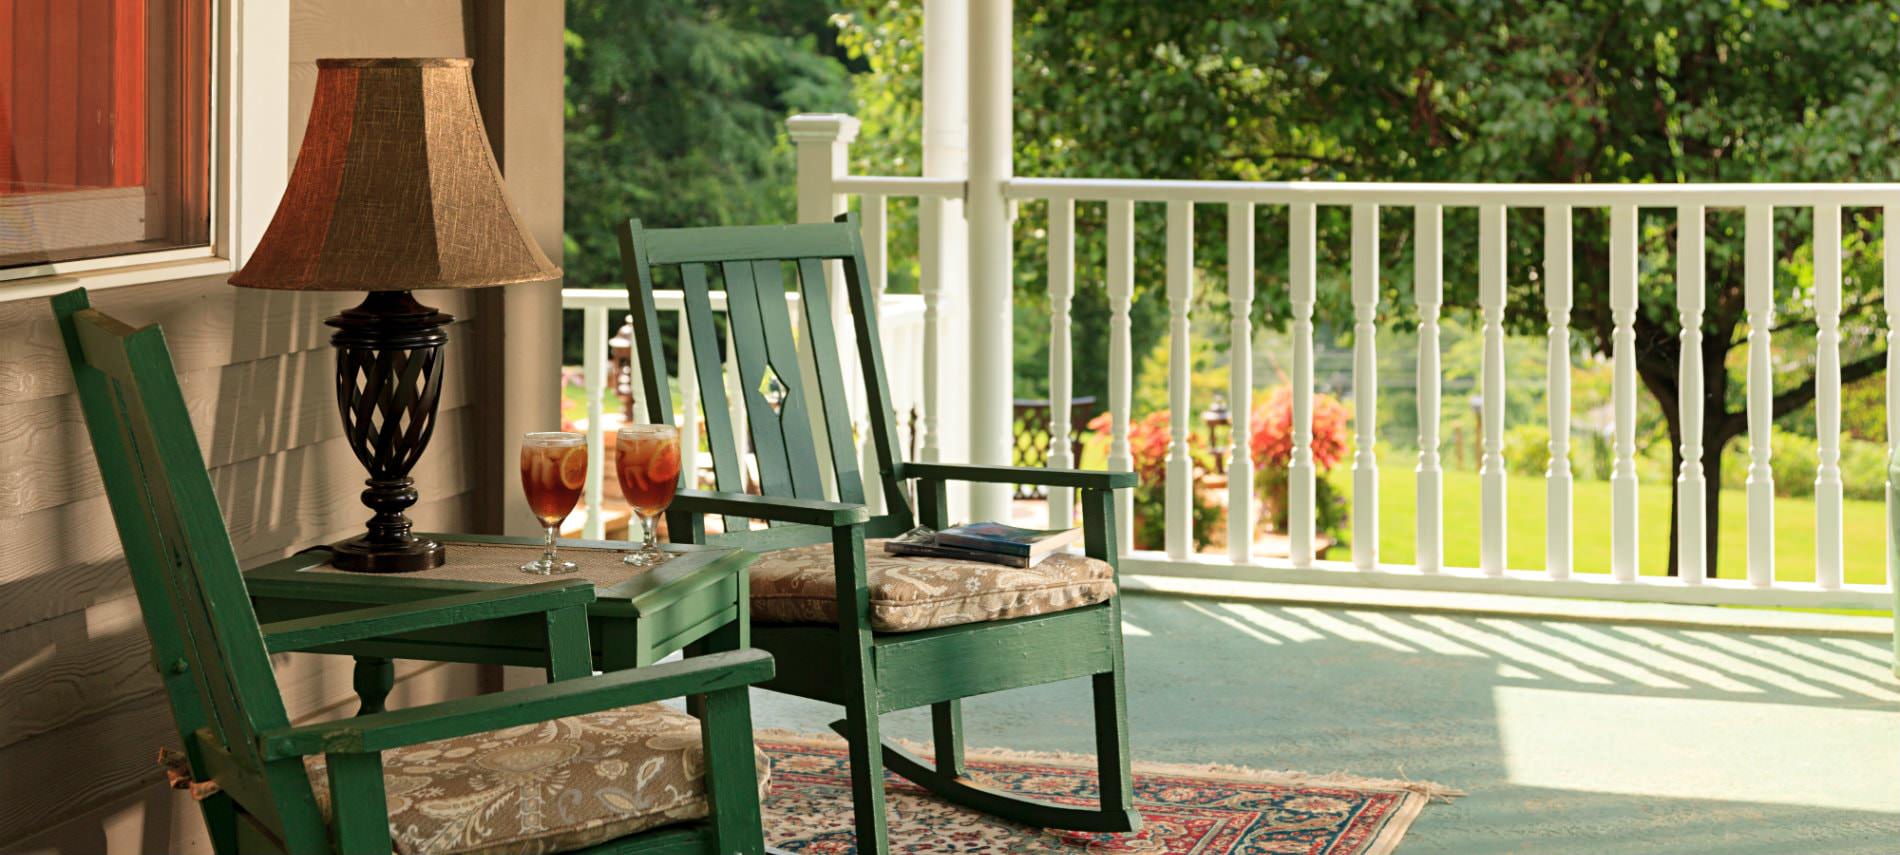 Covered porch with white railing, two green rocking chairs with cushions, table with lamp and view of green landscaping